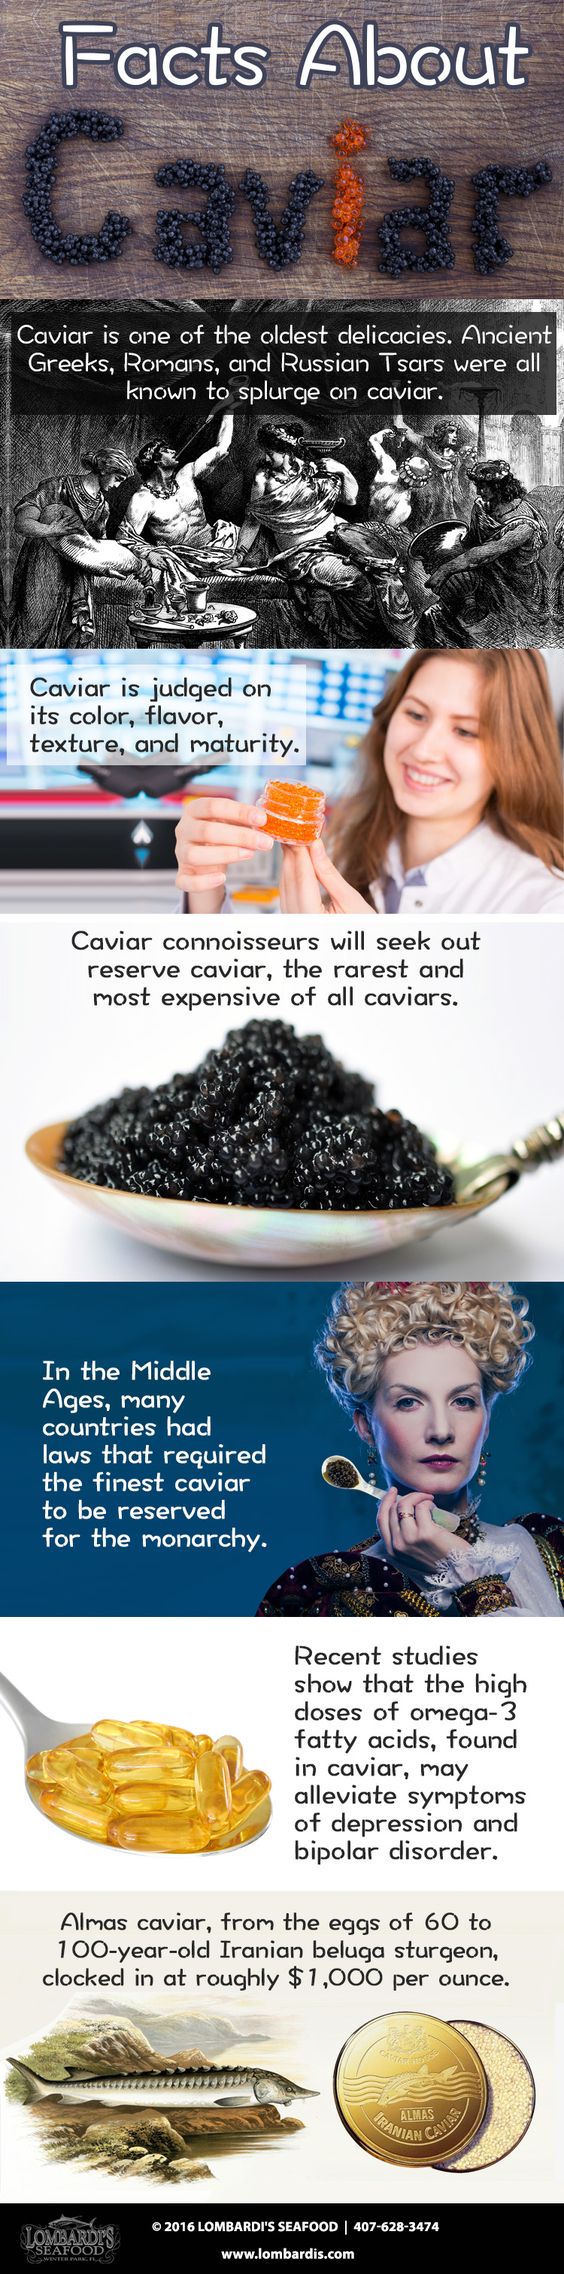 Facts About Caviar